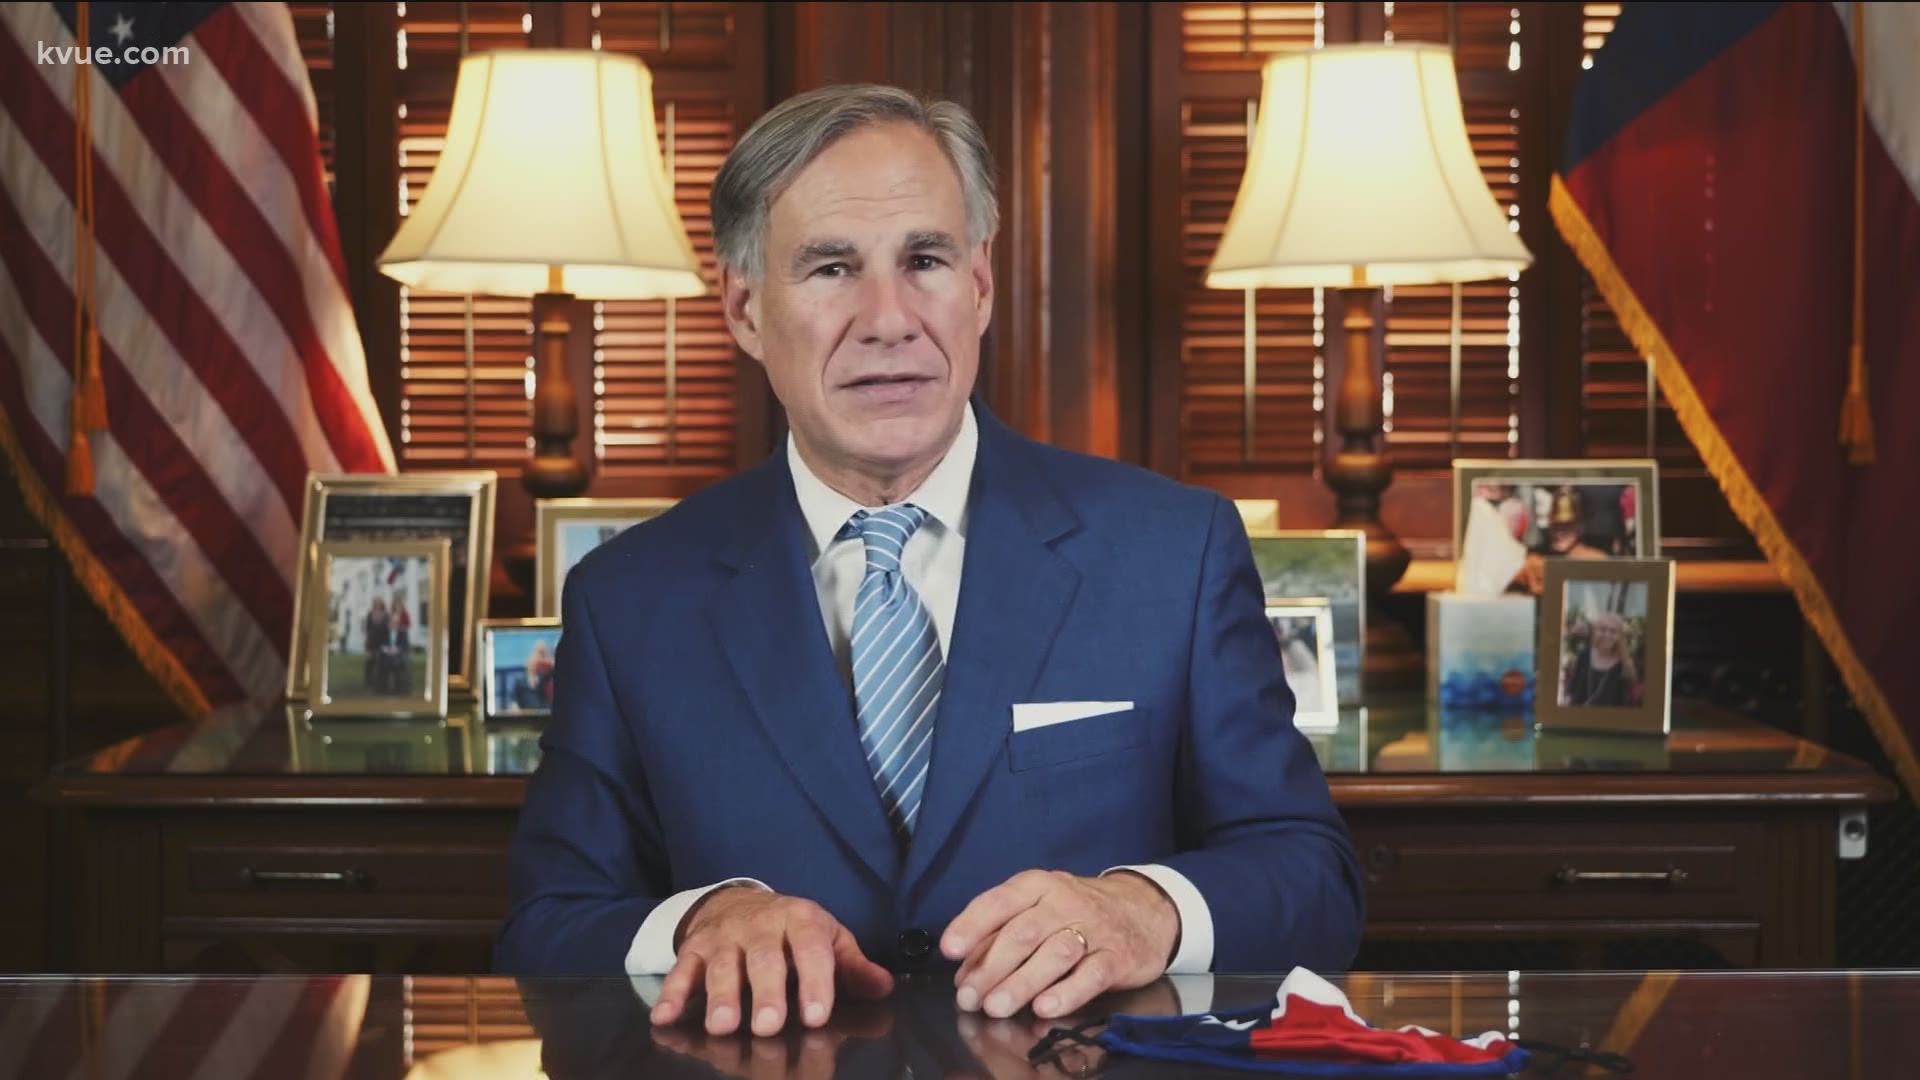 Gov. Abbott released a video Thursday, saying COVID-19 isn't going away and that the spread of the virus is only getting worse.